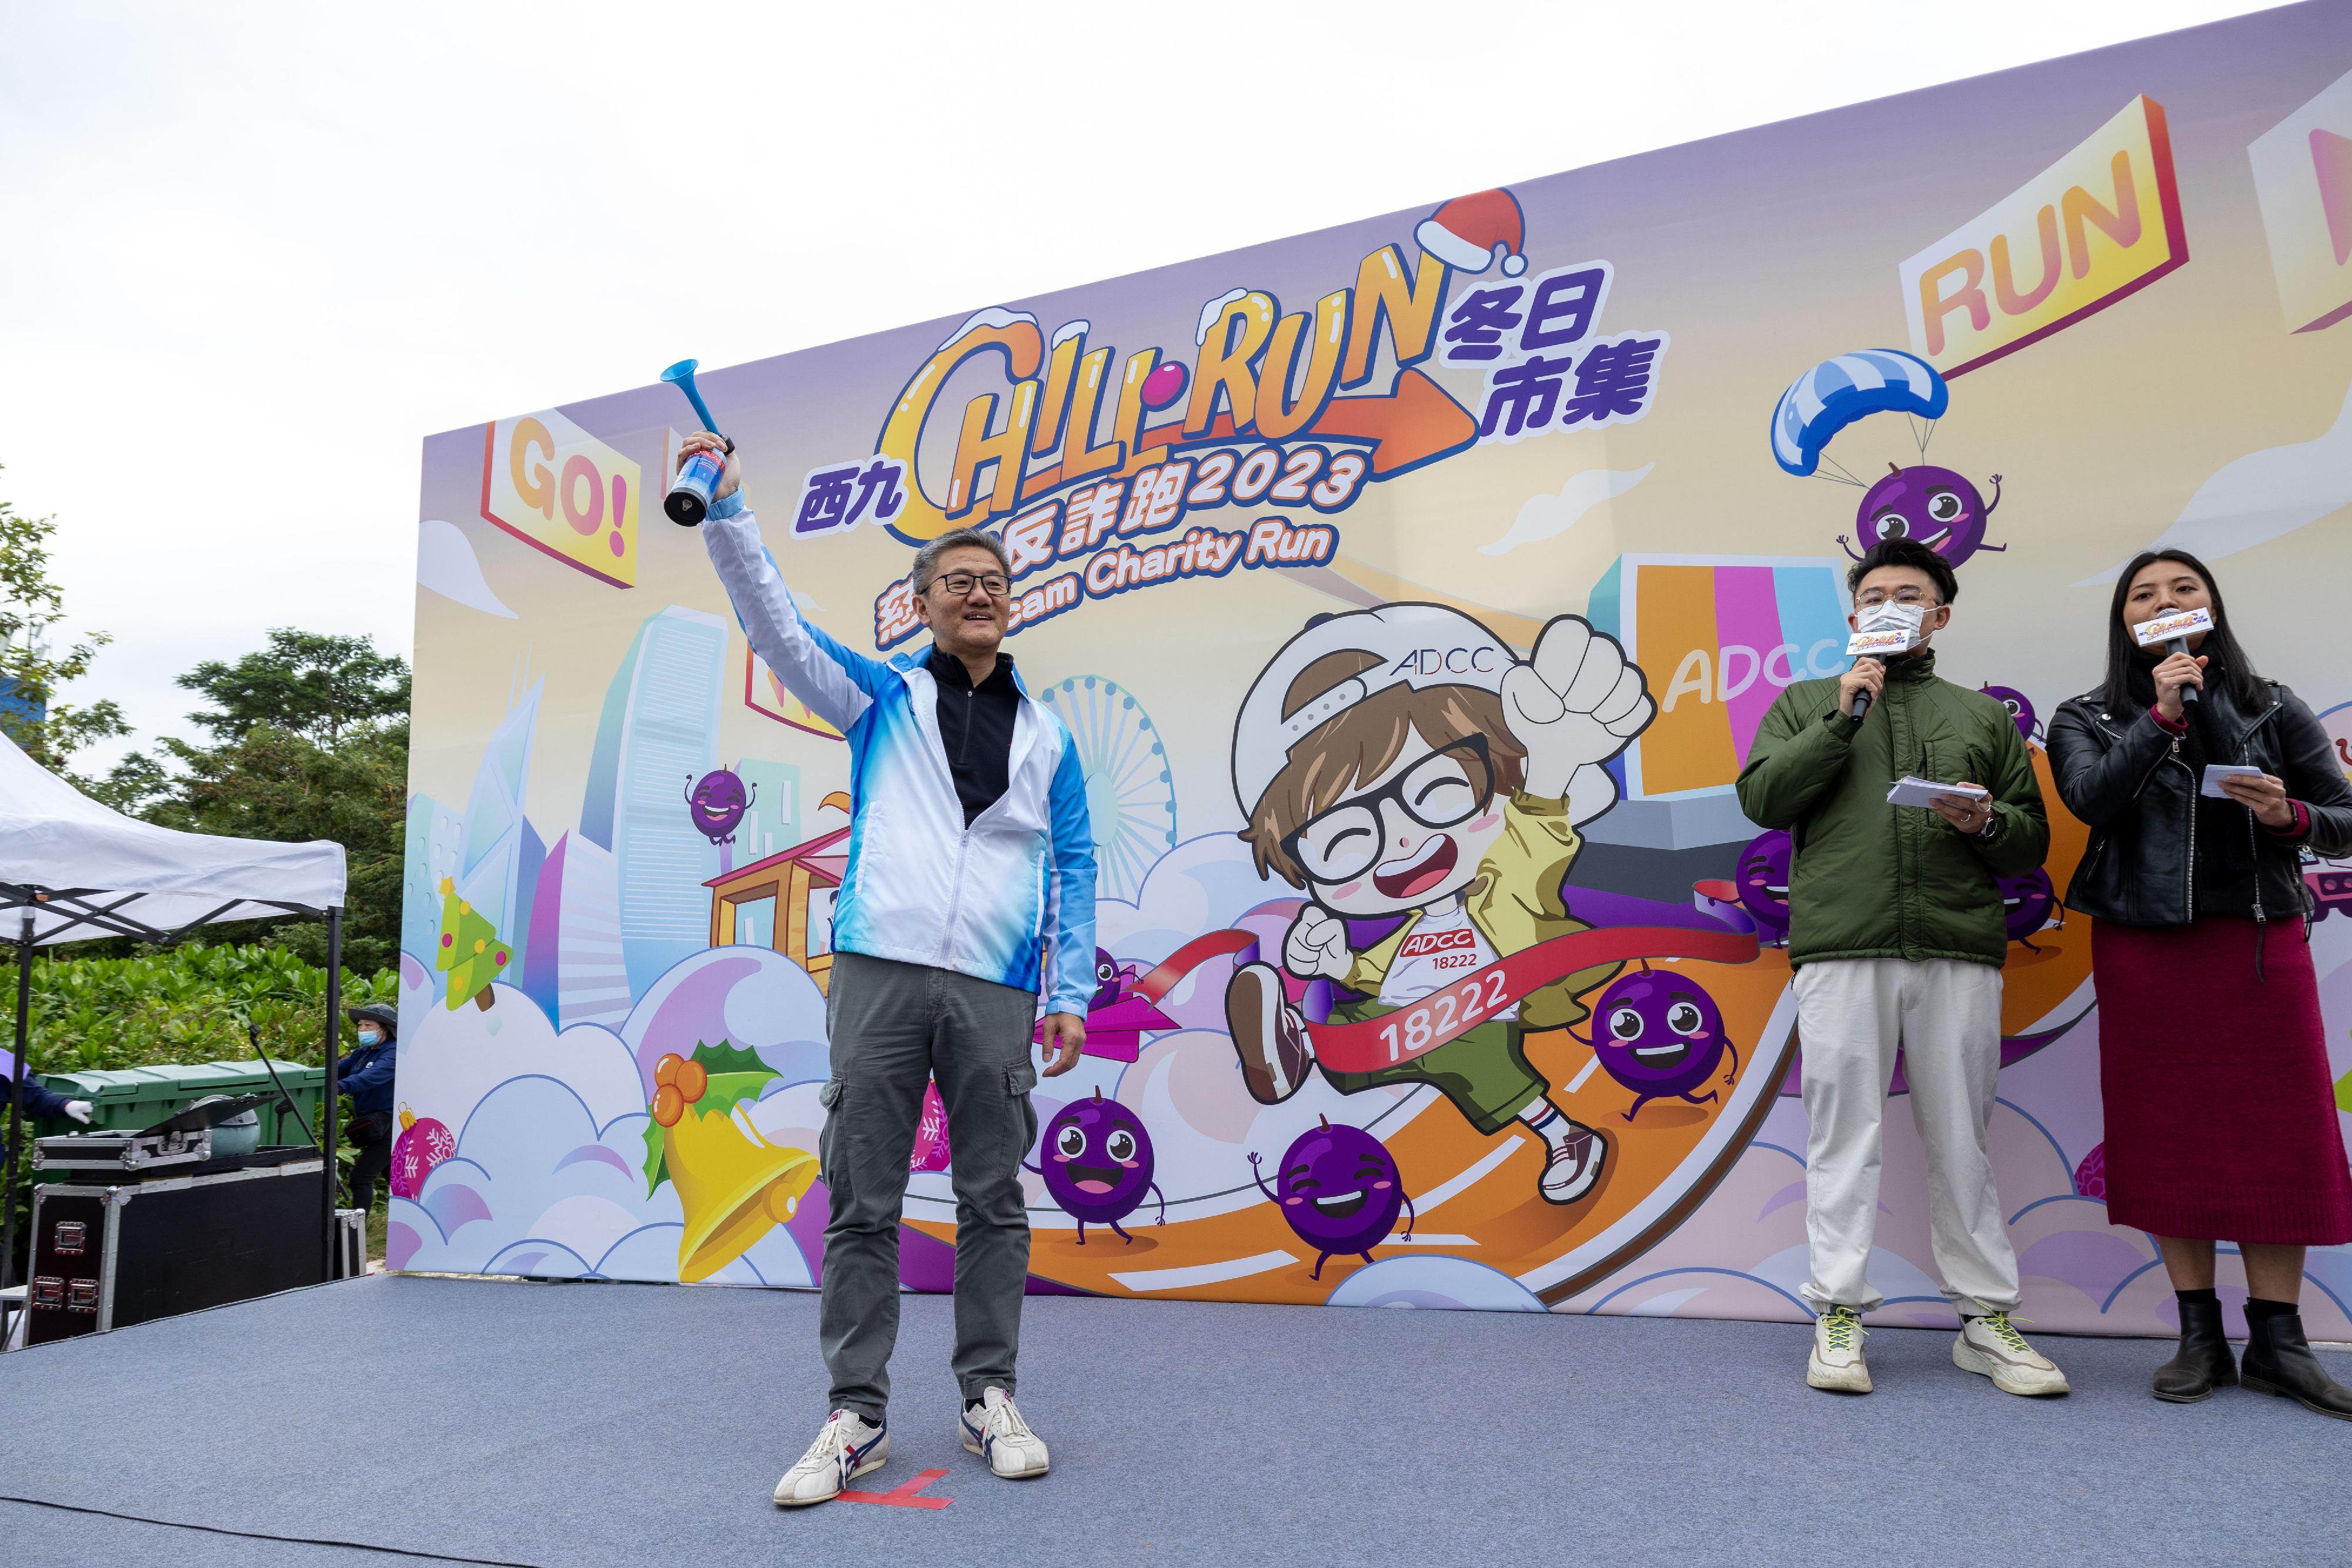 The Anti-Deception Coordination Centre of the Hong Kong Police Force organises the "West Kowloon CHILL RUN Winter Market cum Anti-Scam Charity Run 2023" at the West Kowloon Cultural District today (December 17). Photo shows the Commissioner of Police, Mr Siu Chak-yee (first left), officiating at the race.